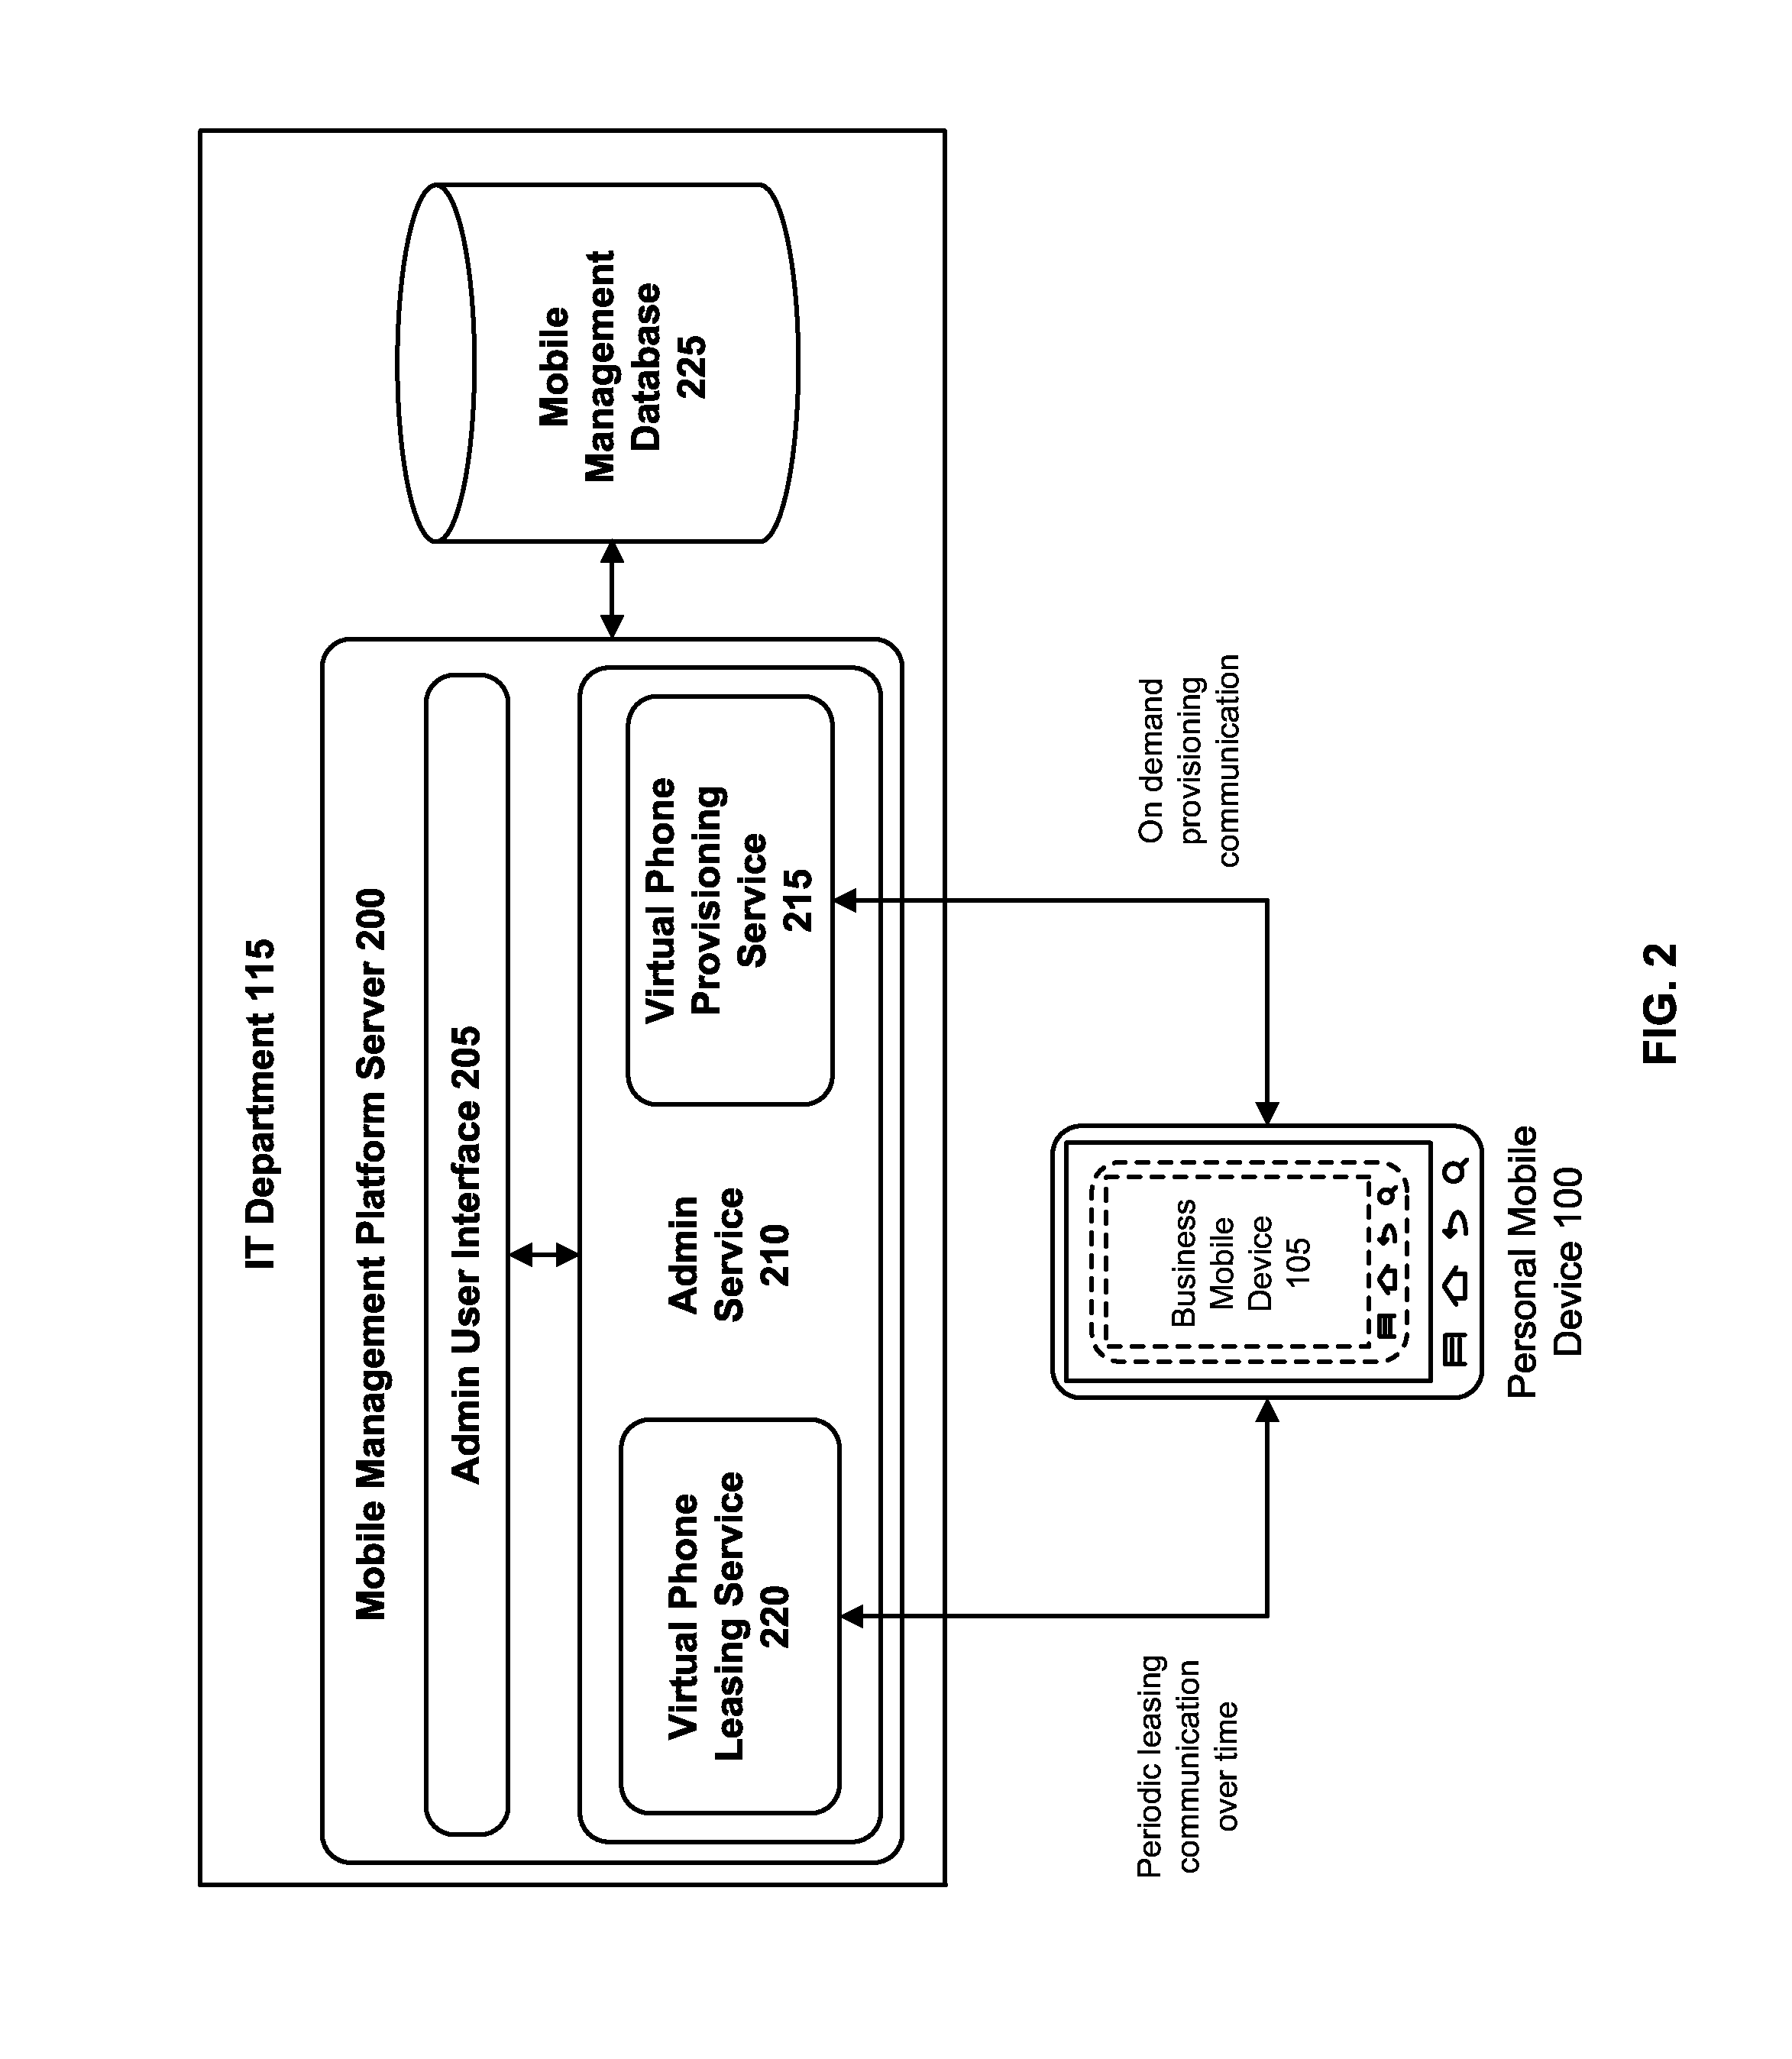 User interface for controlling use of a business environment on a mobile device